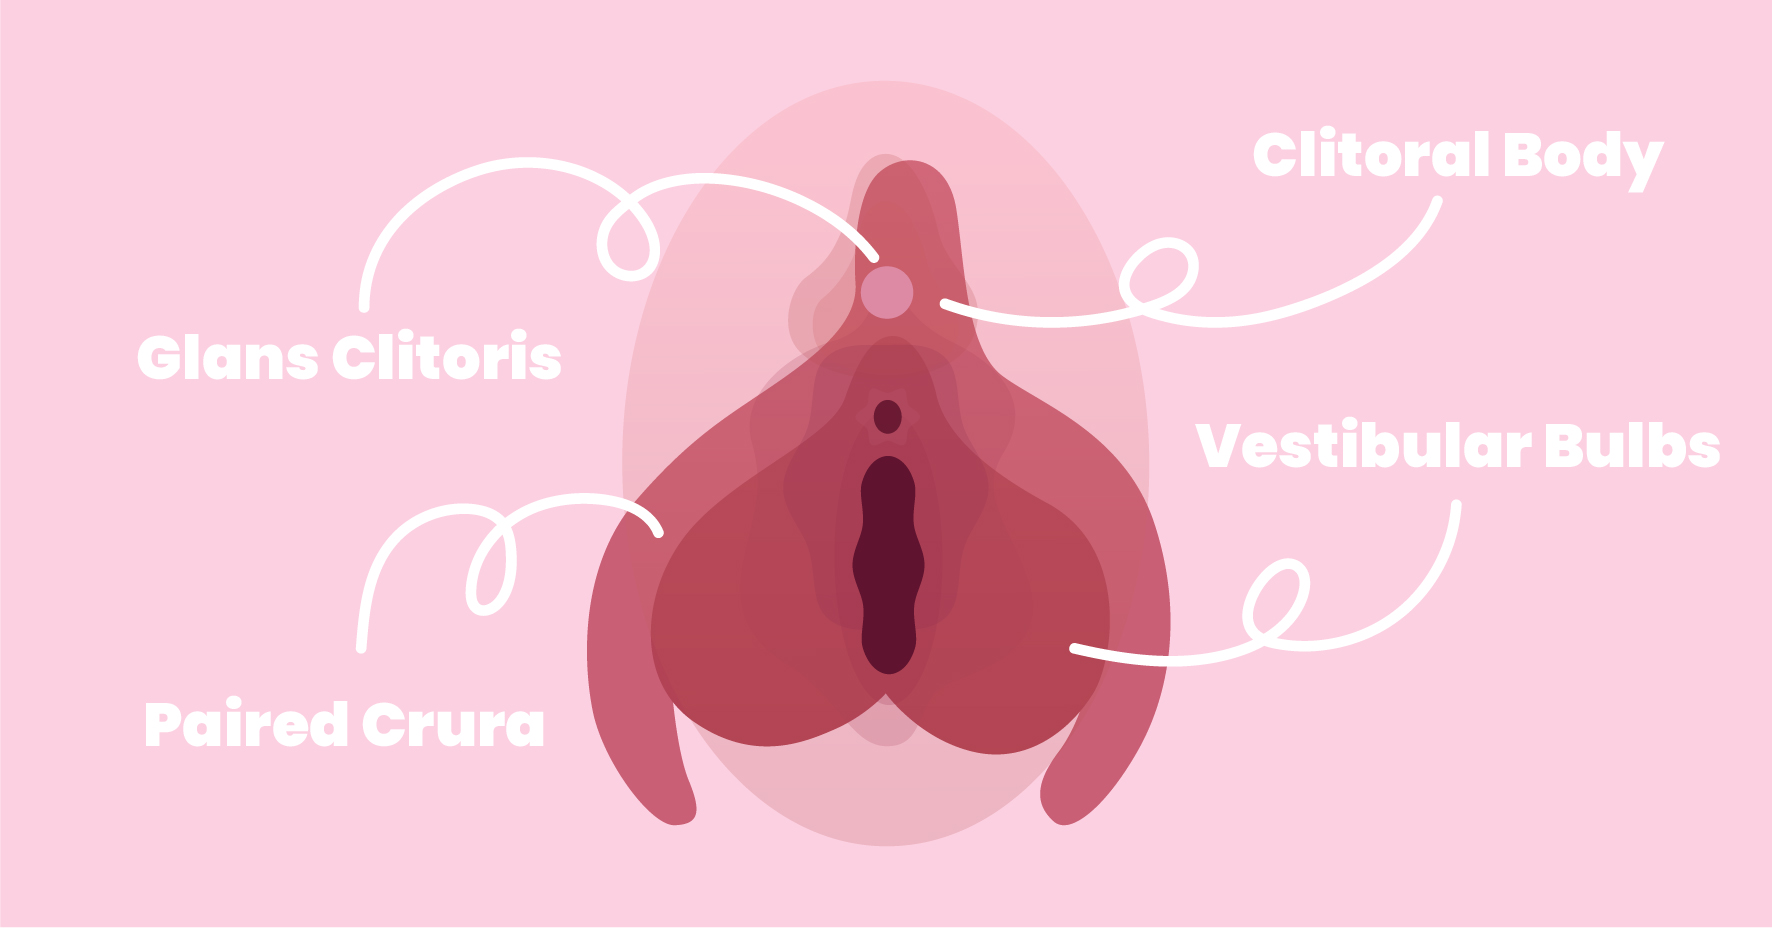 The clitoris is a lot bigger than you think